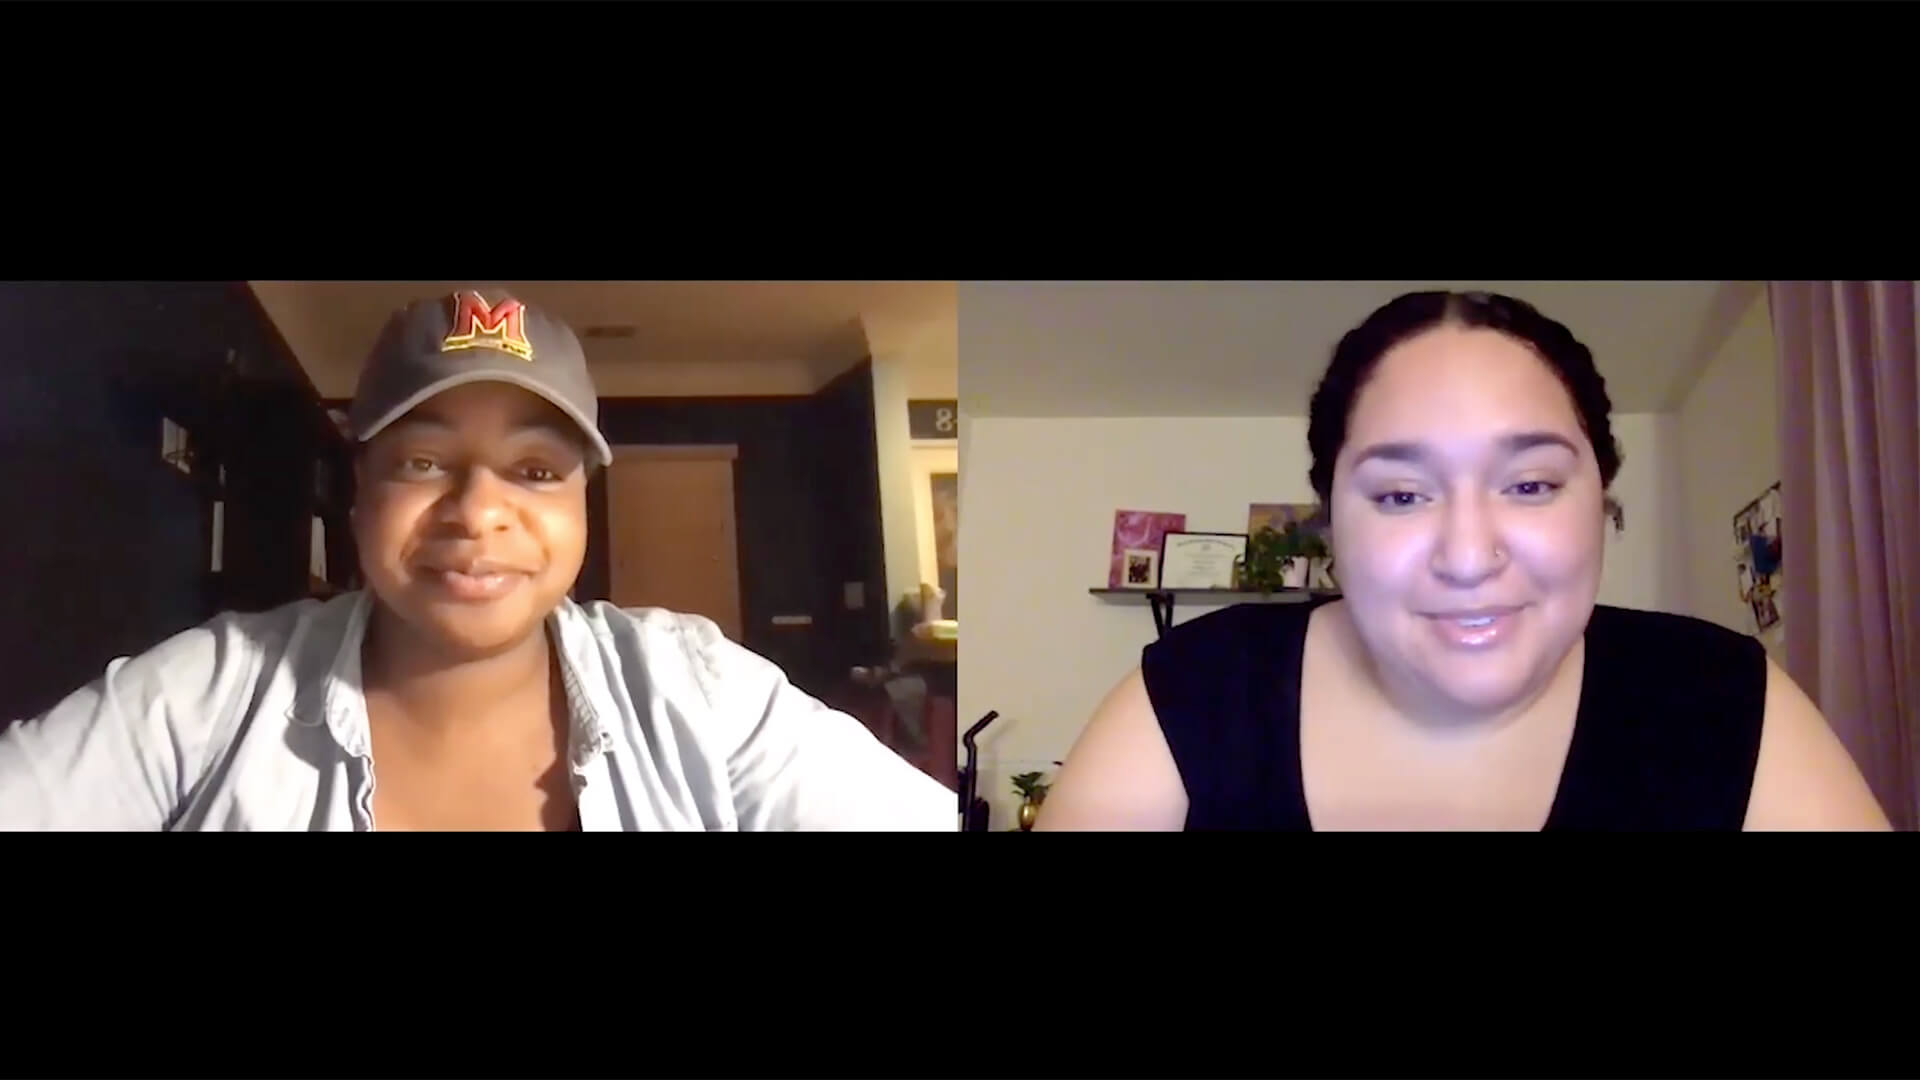 Tuesday's Terp Talent Showcase hosts Brianna Aldridge MPH ’20 and Kamrie Risku M.Ed. ‘20 on Zoom